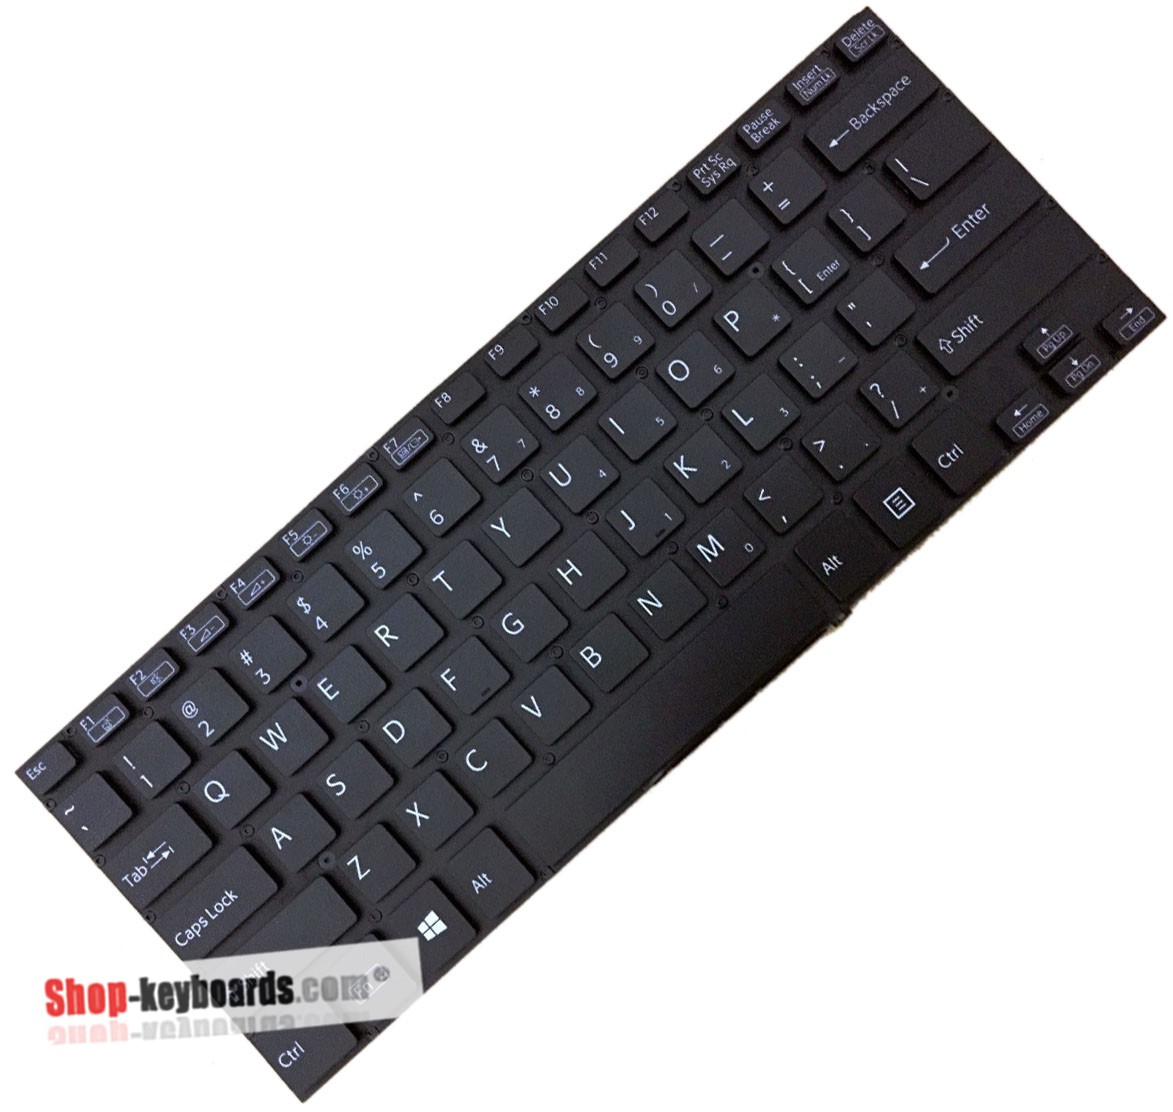 Sony VAIO SVF14A1C5E Keyboard replacement